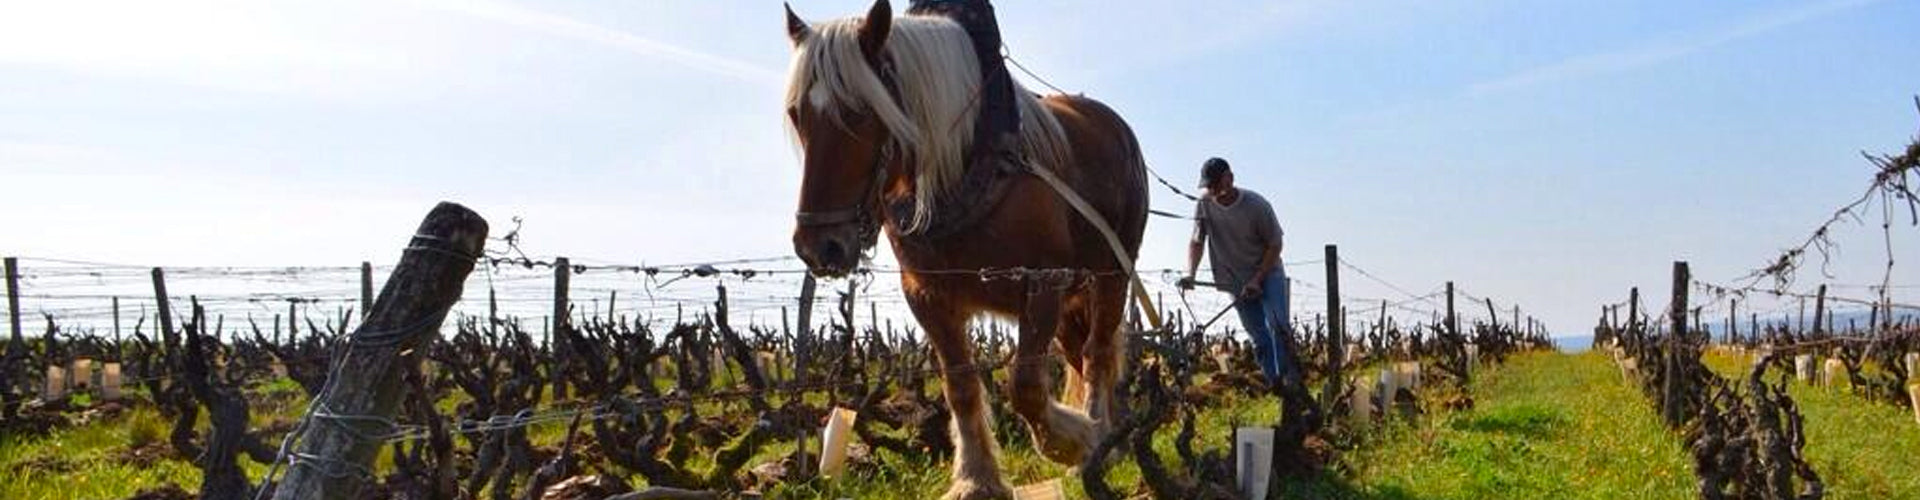 Horse ploughing Domaine Huet Vouvray Vineyards